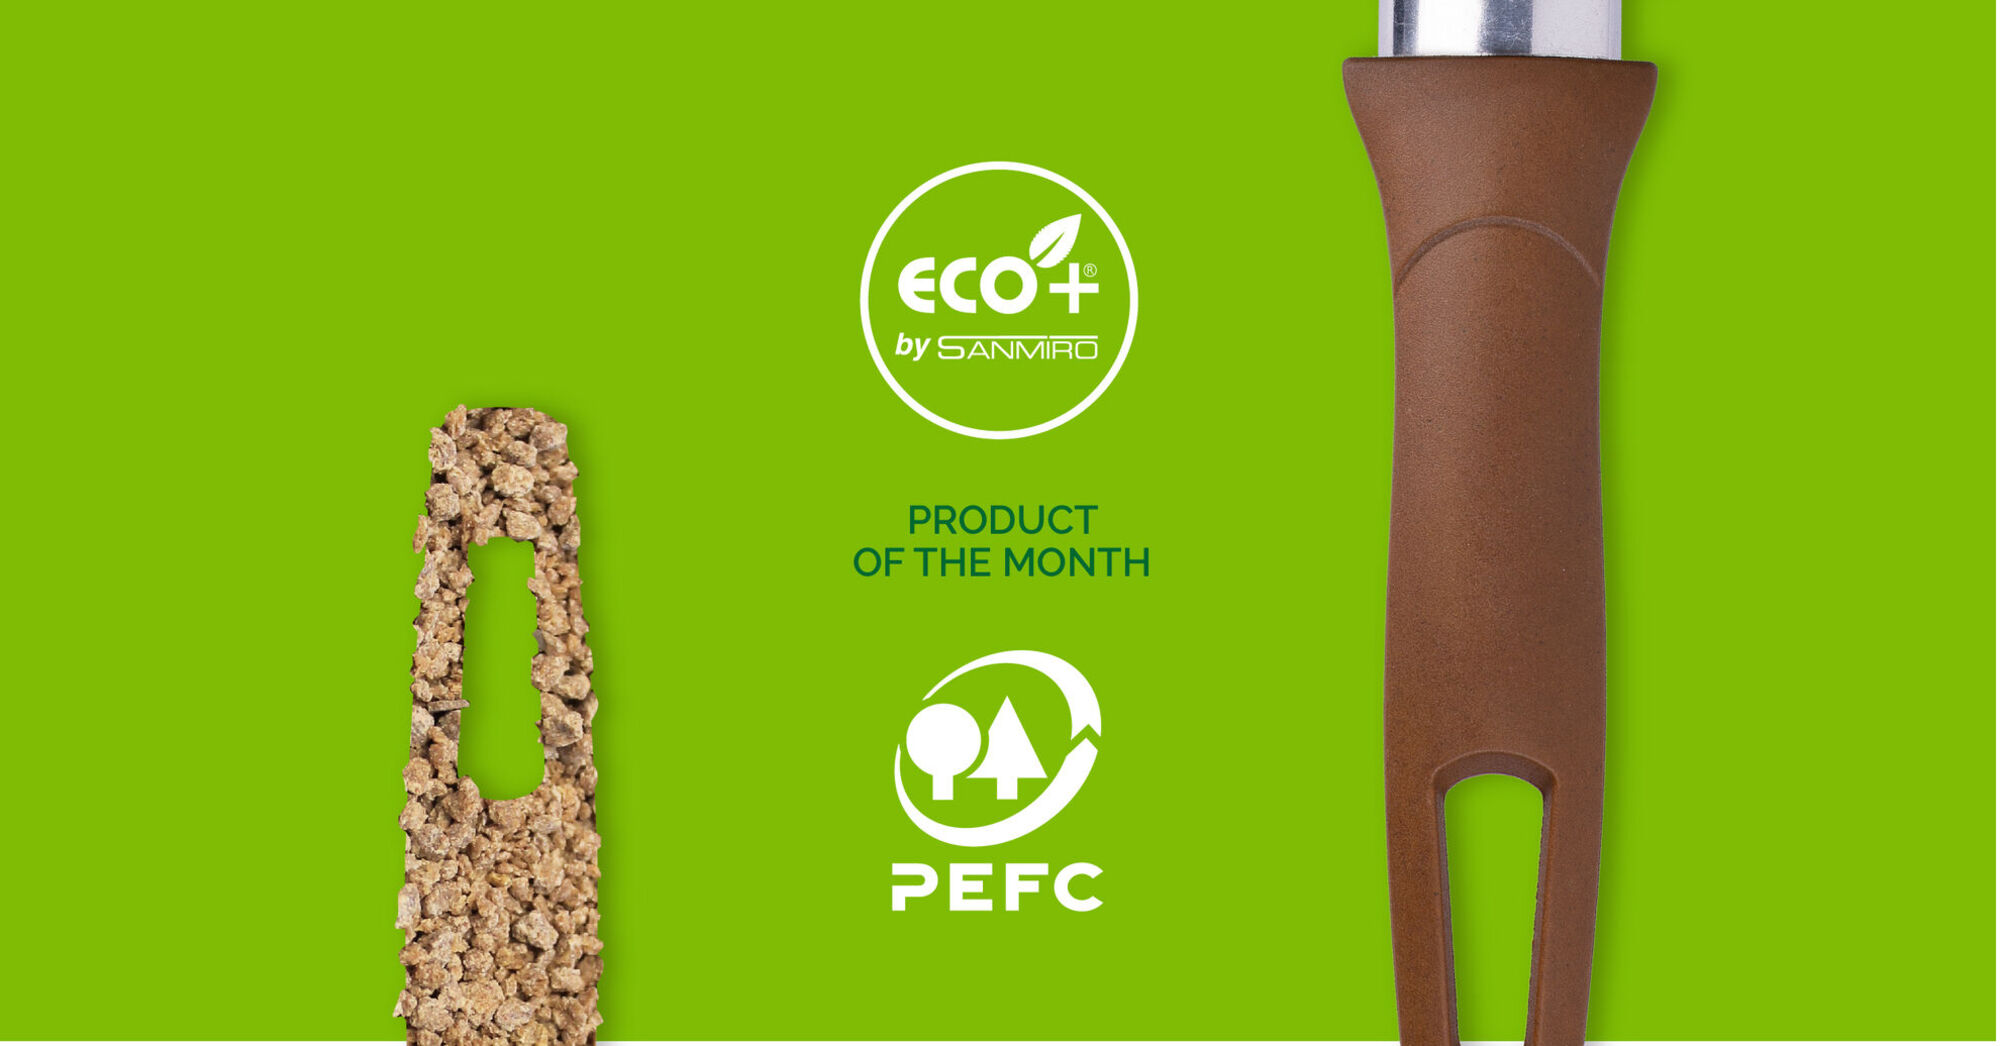 ECO+, PEFC product of the month.